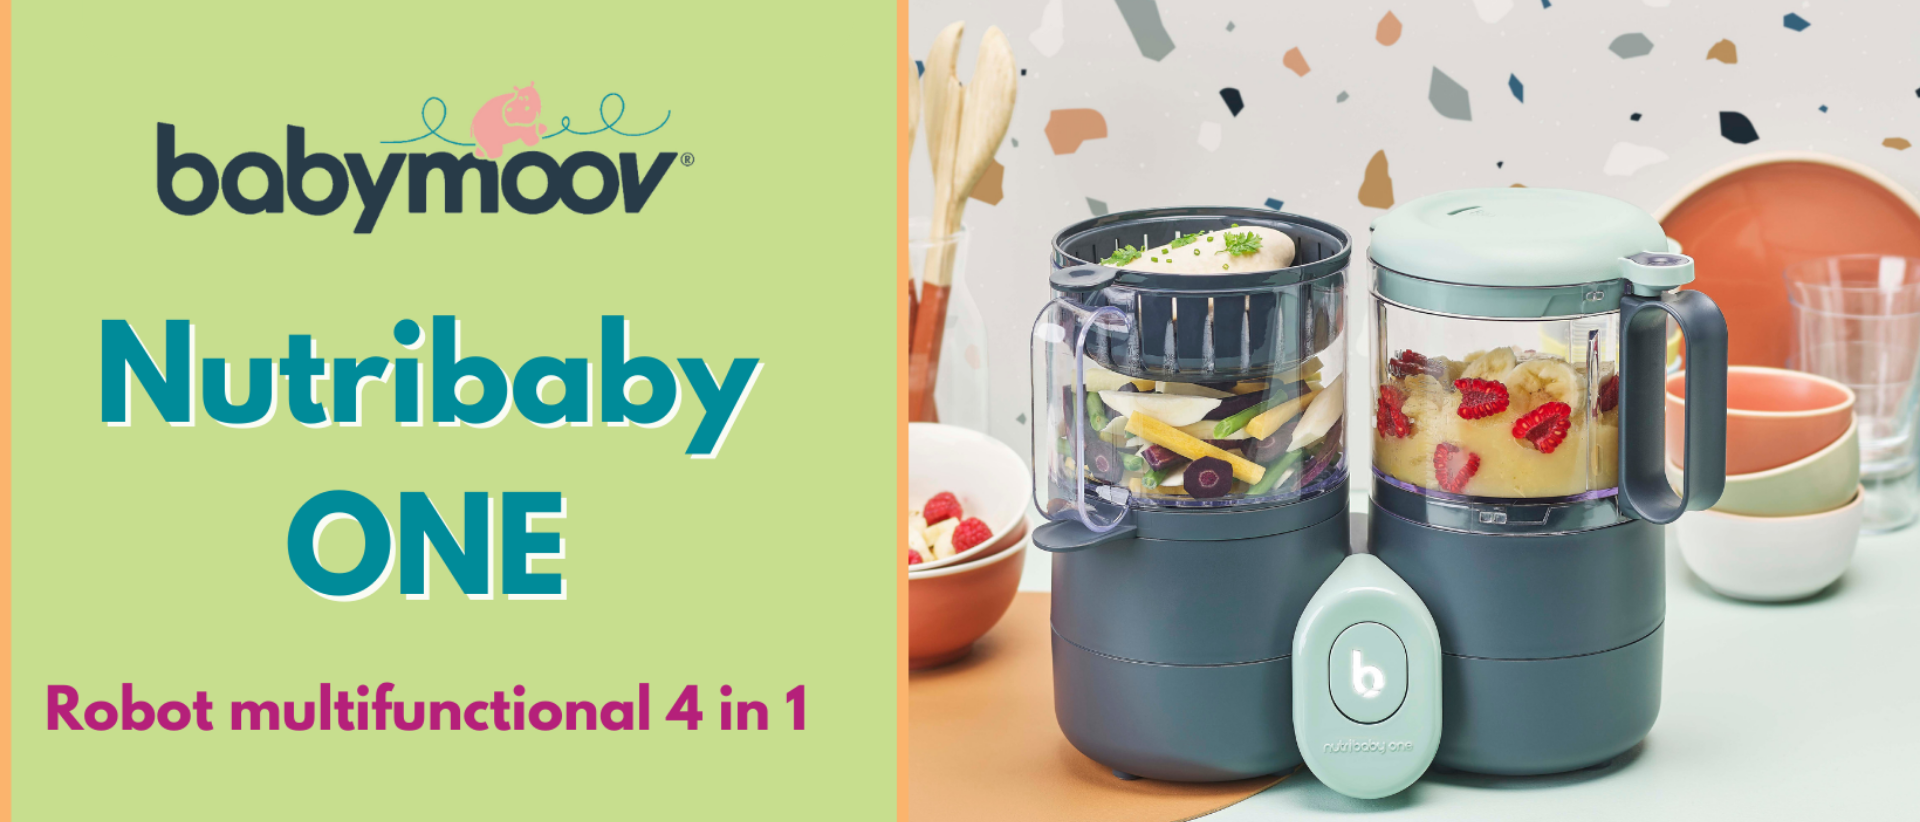 Nutribaby one